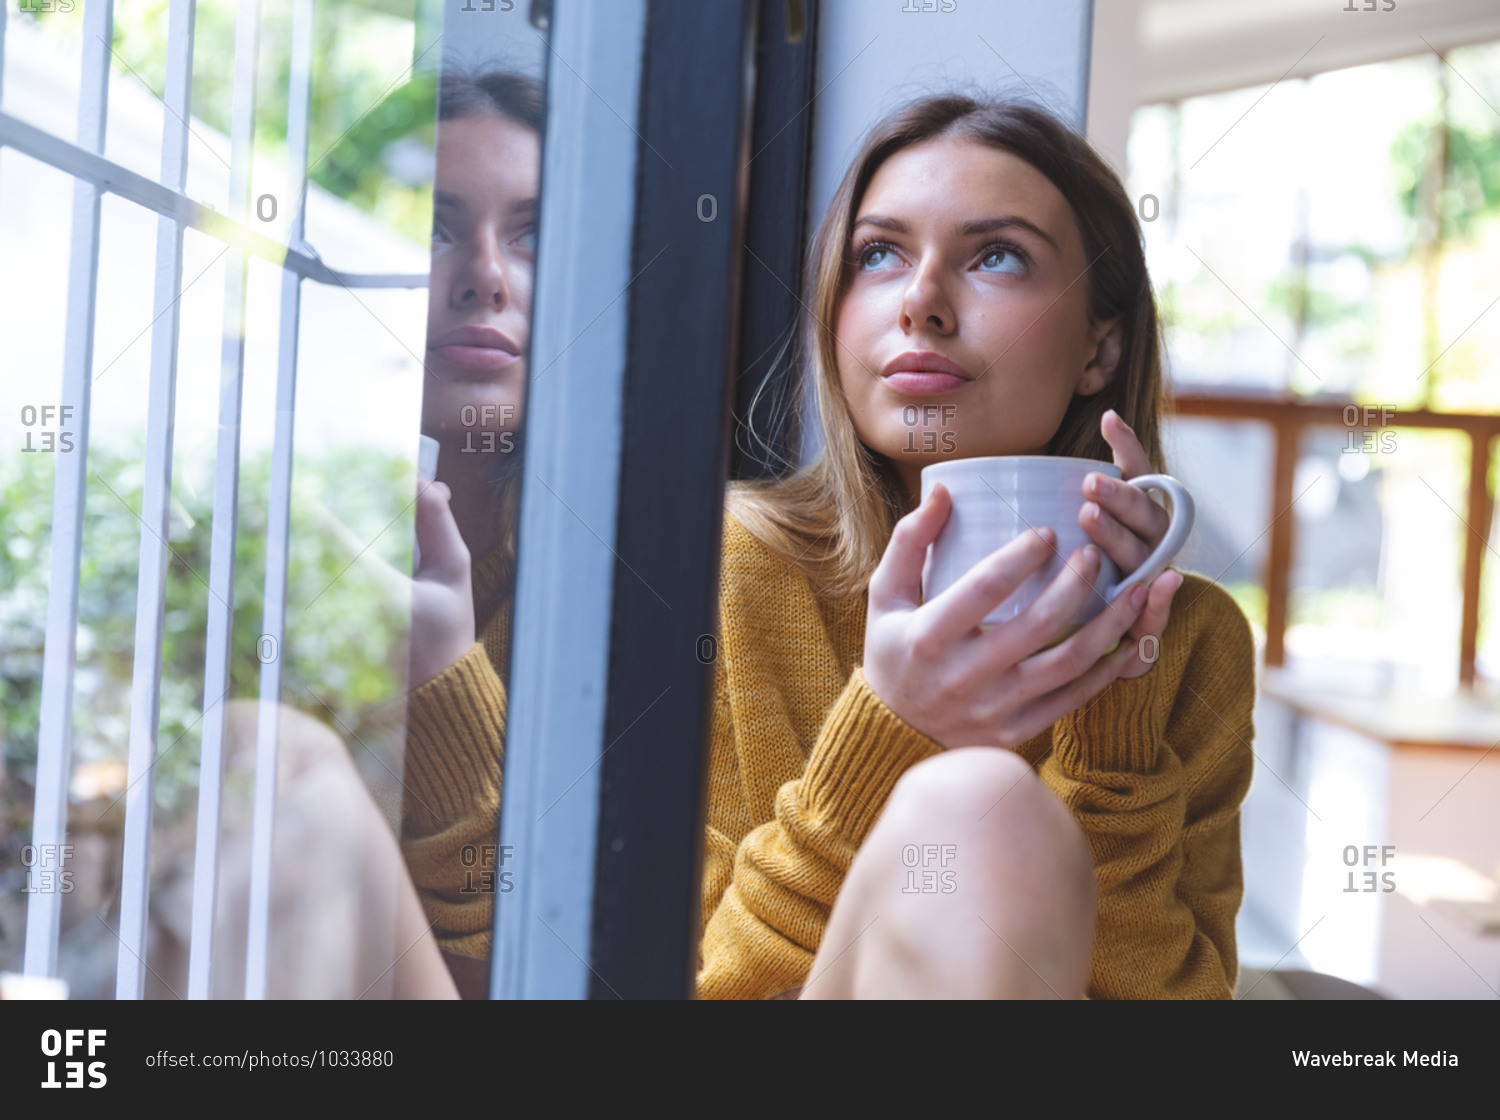 Caucasian woman spending time at home, sitting by window, holding green mug looking out of window. Social distancing during Covid 19 Coronavirus quarantine lockdown.